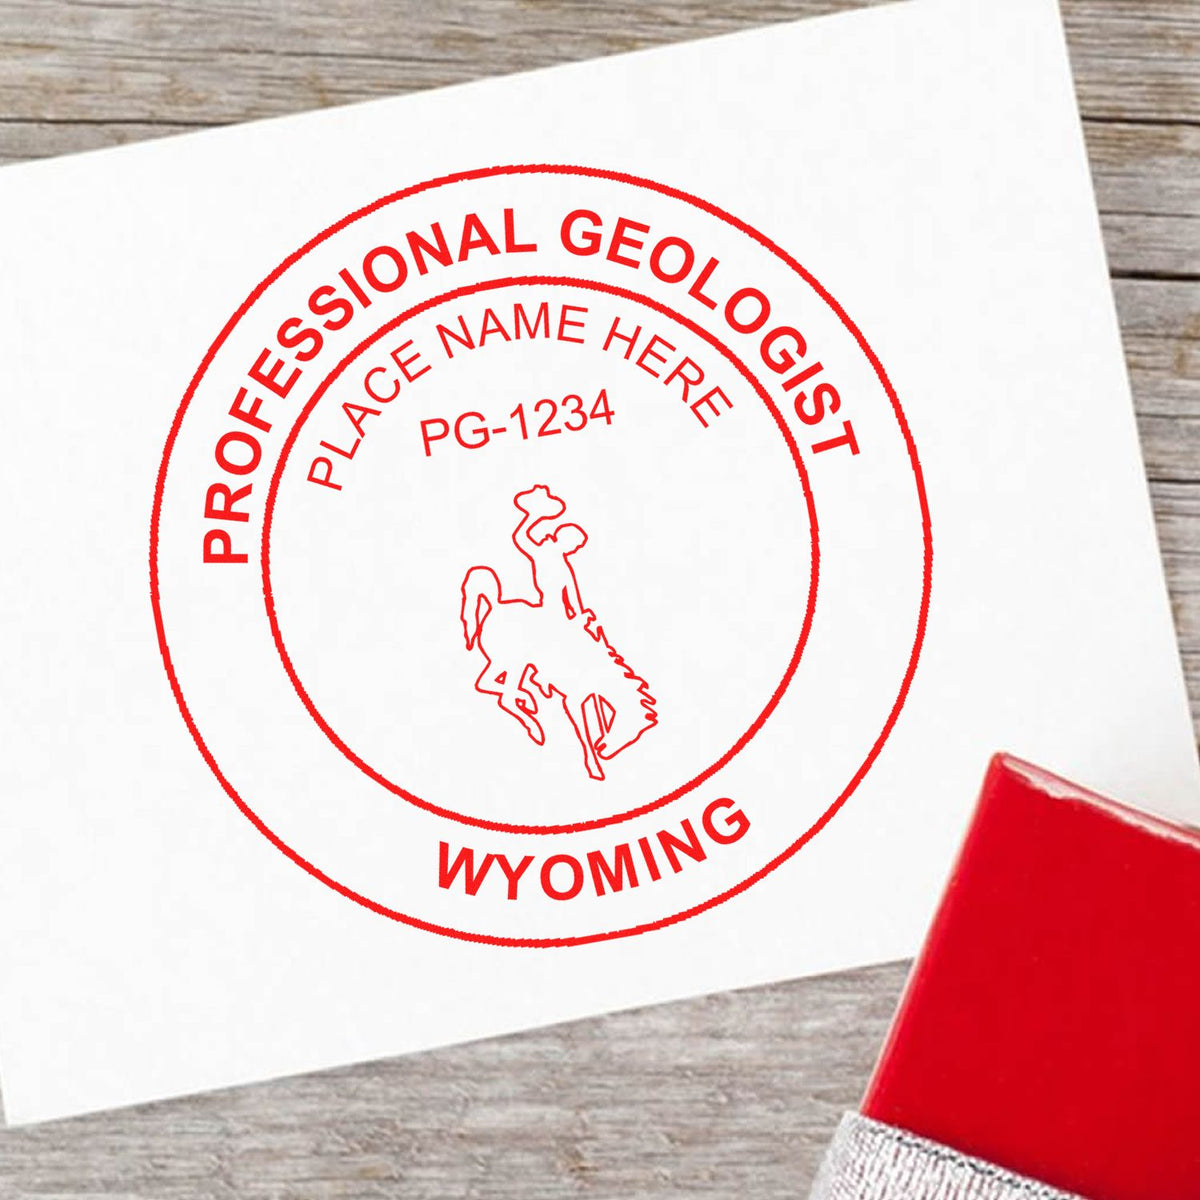 The Premium MaxLight Pre-Inked Wyoming Geology Stamp stamp impression comes to life with a crisp, detailed image stamped on paper - showcasing true professional quality.